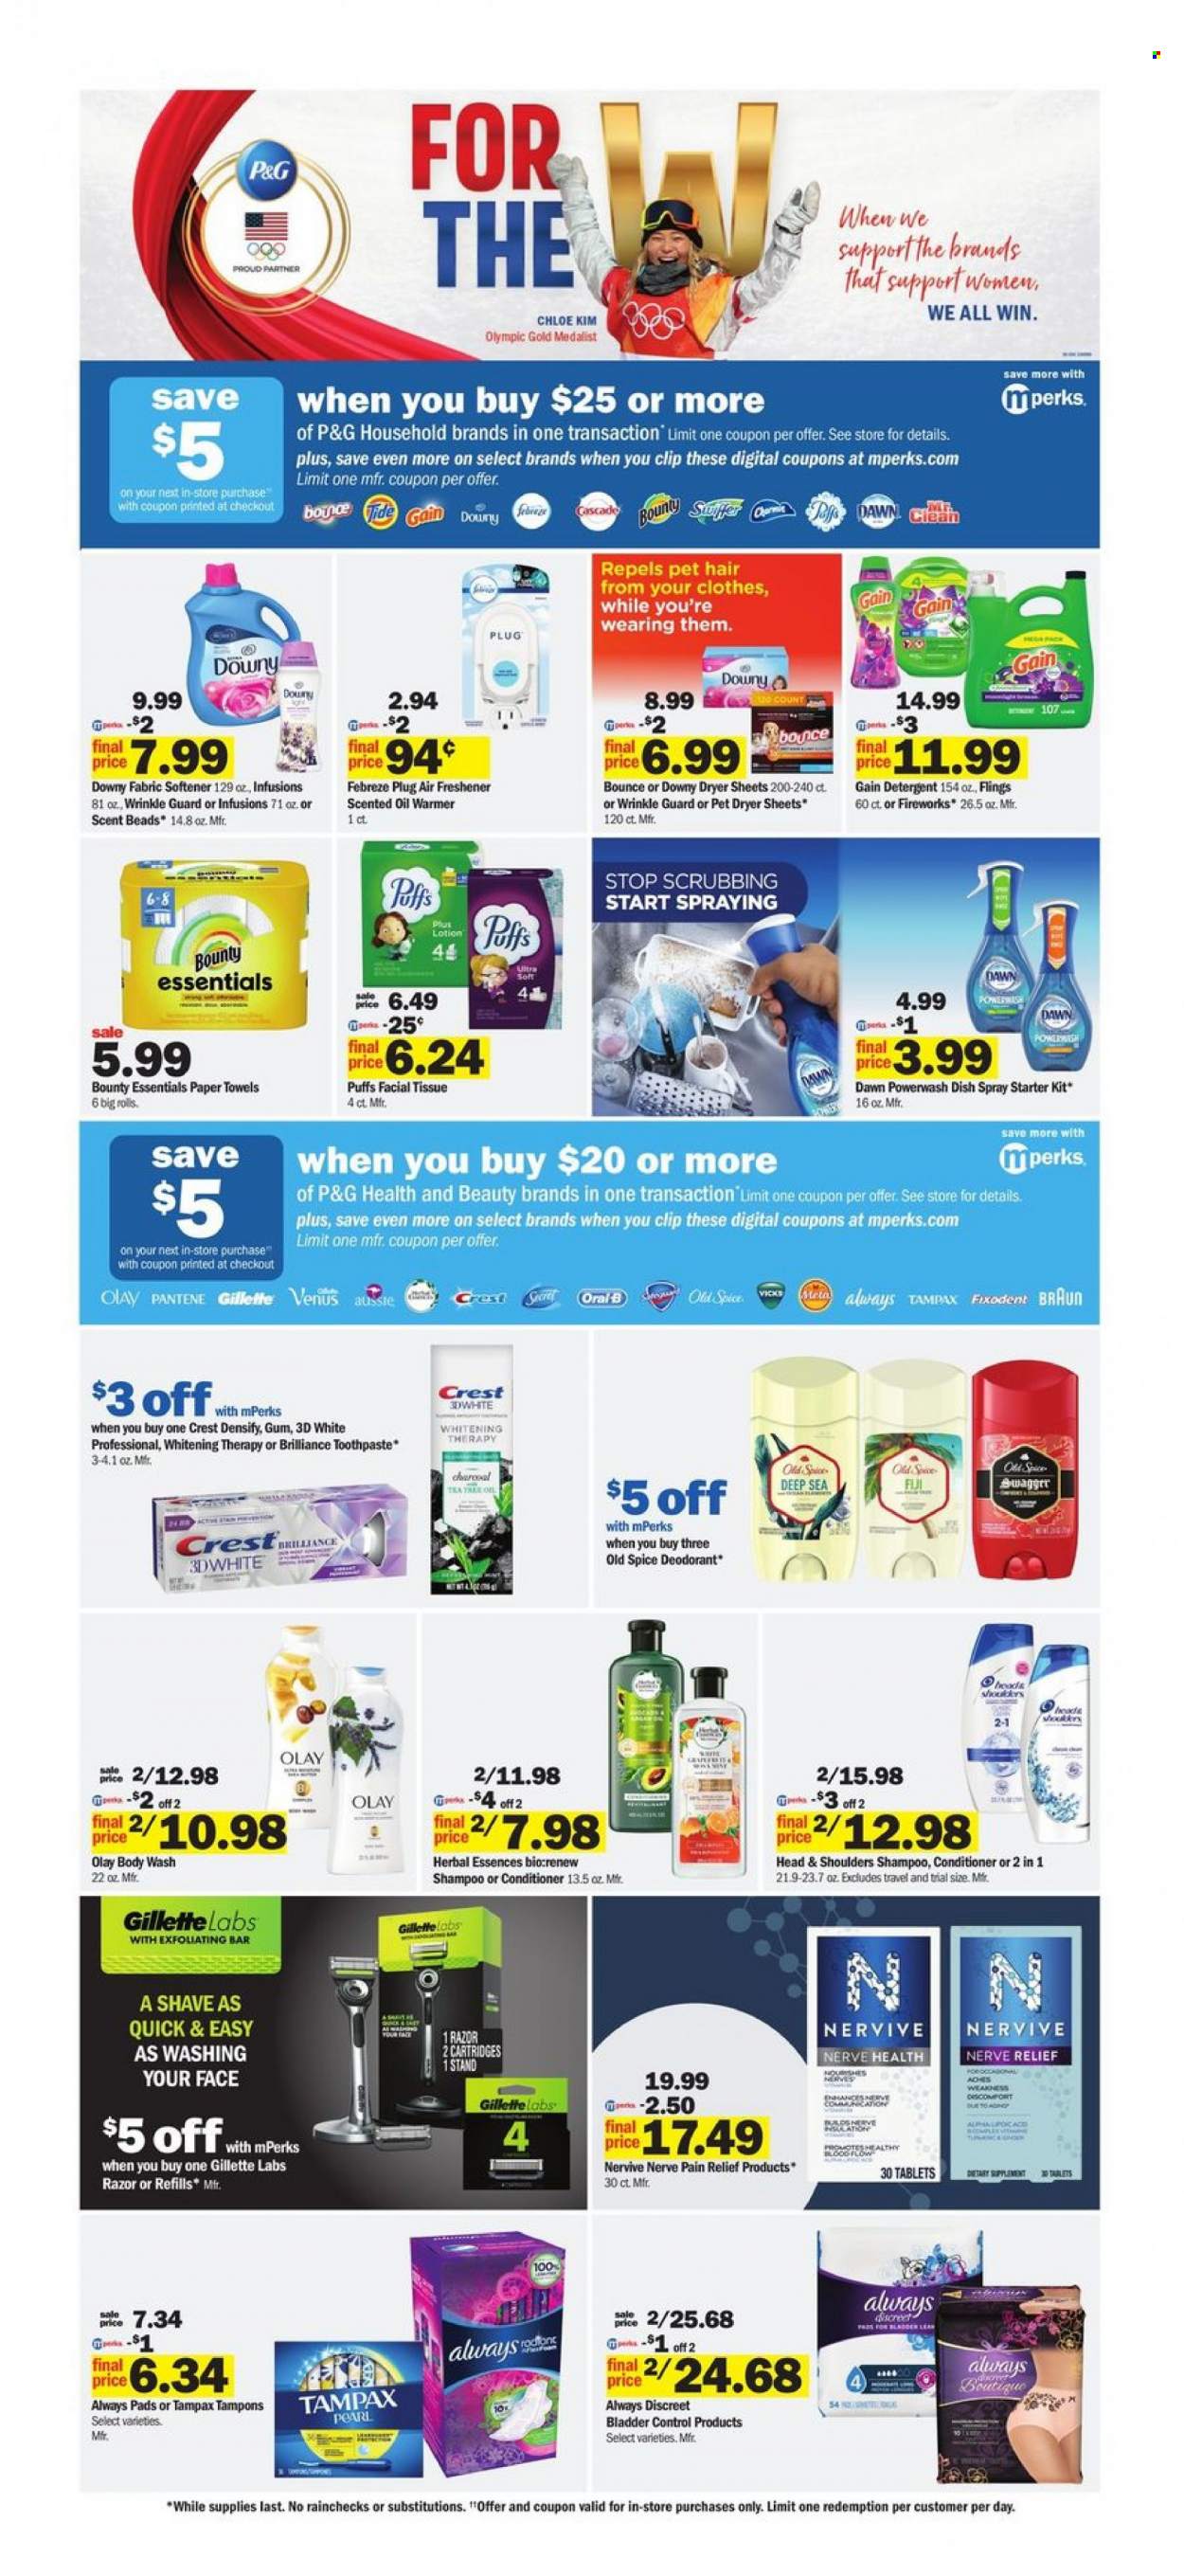 thumbnail - Meijer Flyer - 01/30/2022 - 02/05/2022 - Sales products - puffs, MTR, Bounty, rice, spice, oil, tissues, kitchen towels, paper towels, detergent, Febreze, Gain, Cascade, Tide, fabric softener, dryer sheets, Downy Laundry, body wash, shampoo, Old Spice, Oral-B, toothpaste, Fixodent, Crest, Tampax, Always pads, Always Discreet, tampons, Olay, Aussie, conditioner, Head & Shoulders, Pantene, Herbal Essences, anti-perspirant, Chloé, deodorant, Gillette, razor, Venus, Vicks, air freshener, scented oil, pain relief. Page 17.